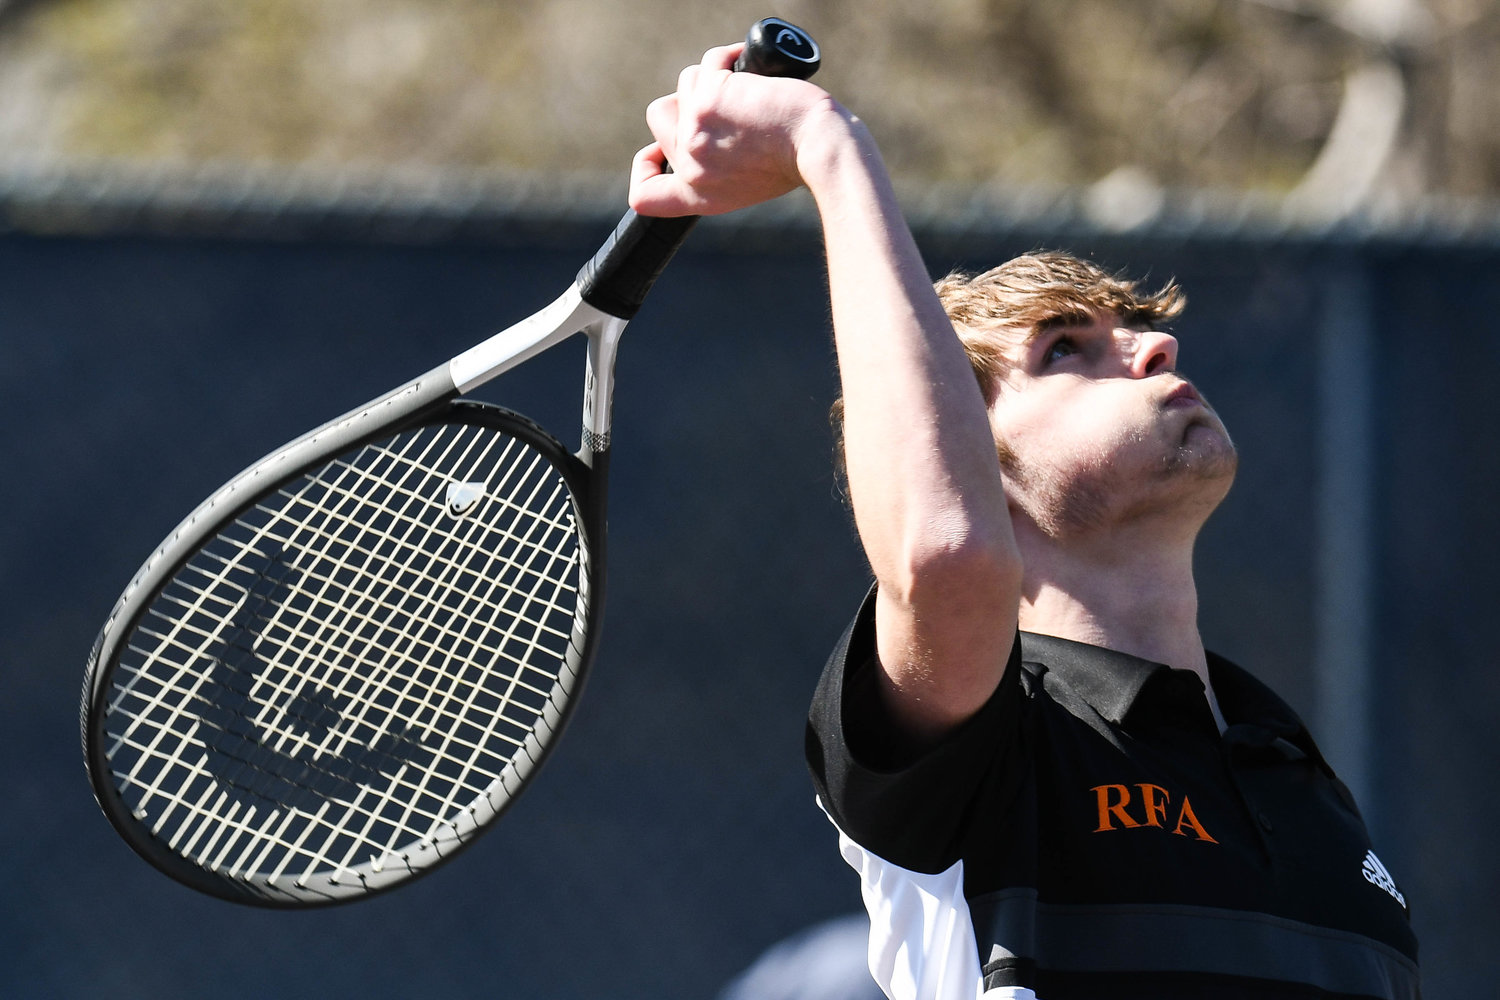 LOOKING FOR AN ACE — Rome Free Academy’s Gavin Civitelli serves the ball during a tennis match against Central Valley Academy on Thursday. Civitelli won in second singles and the Black Knights won 5-0 on the road in the Tri-Valley League.